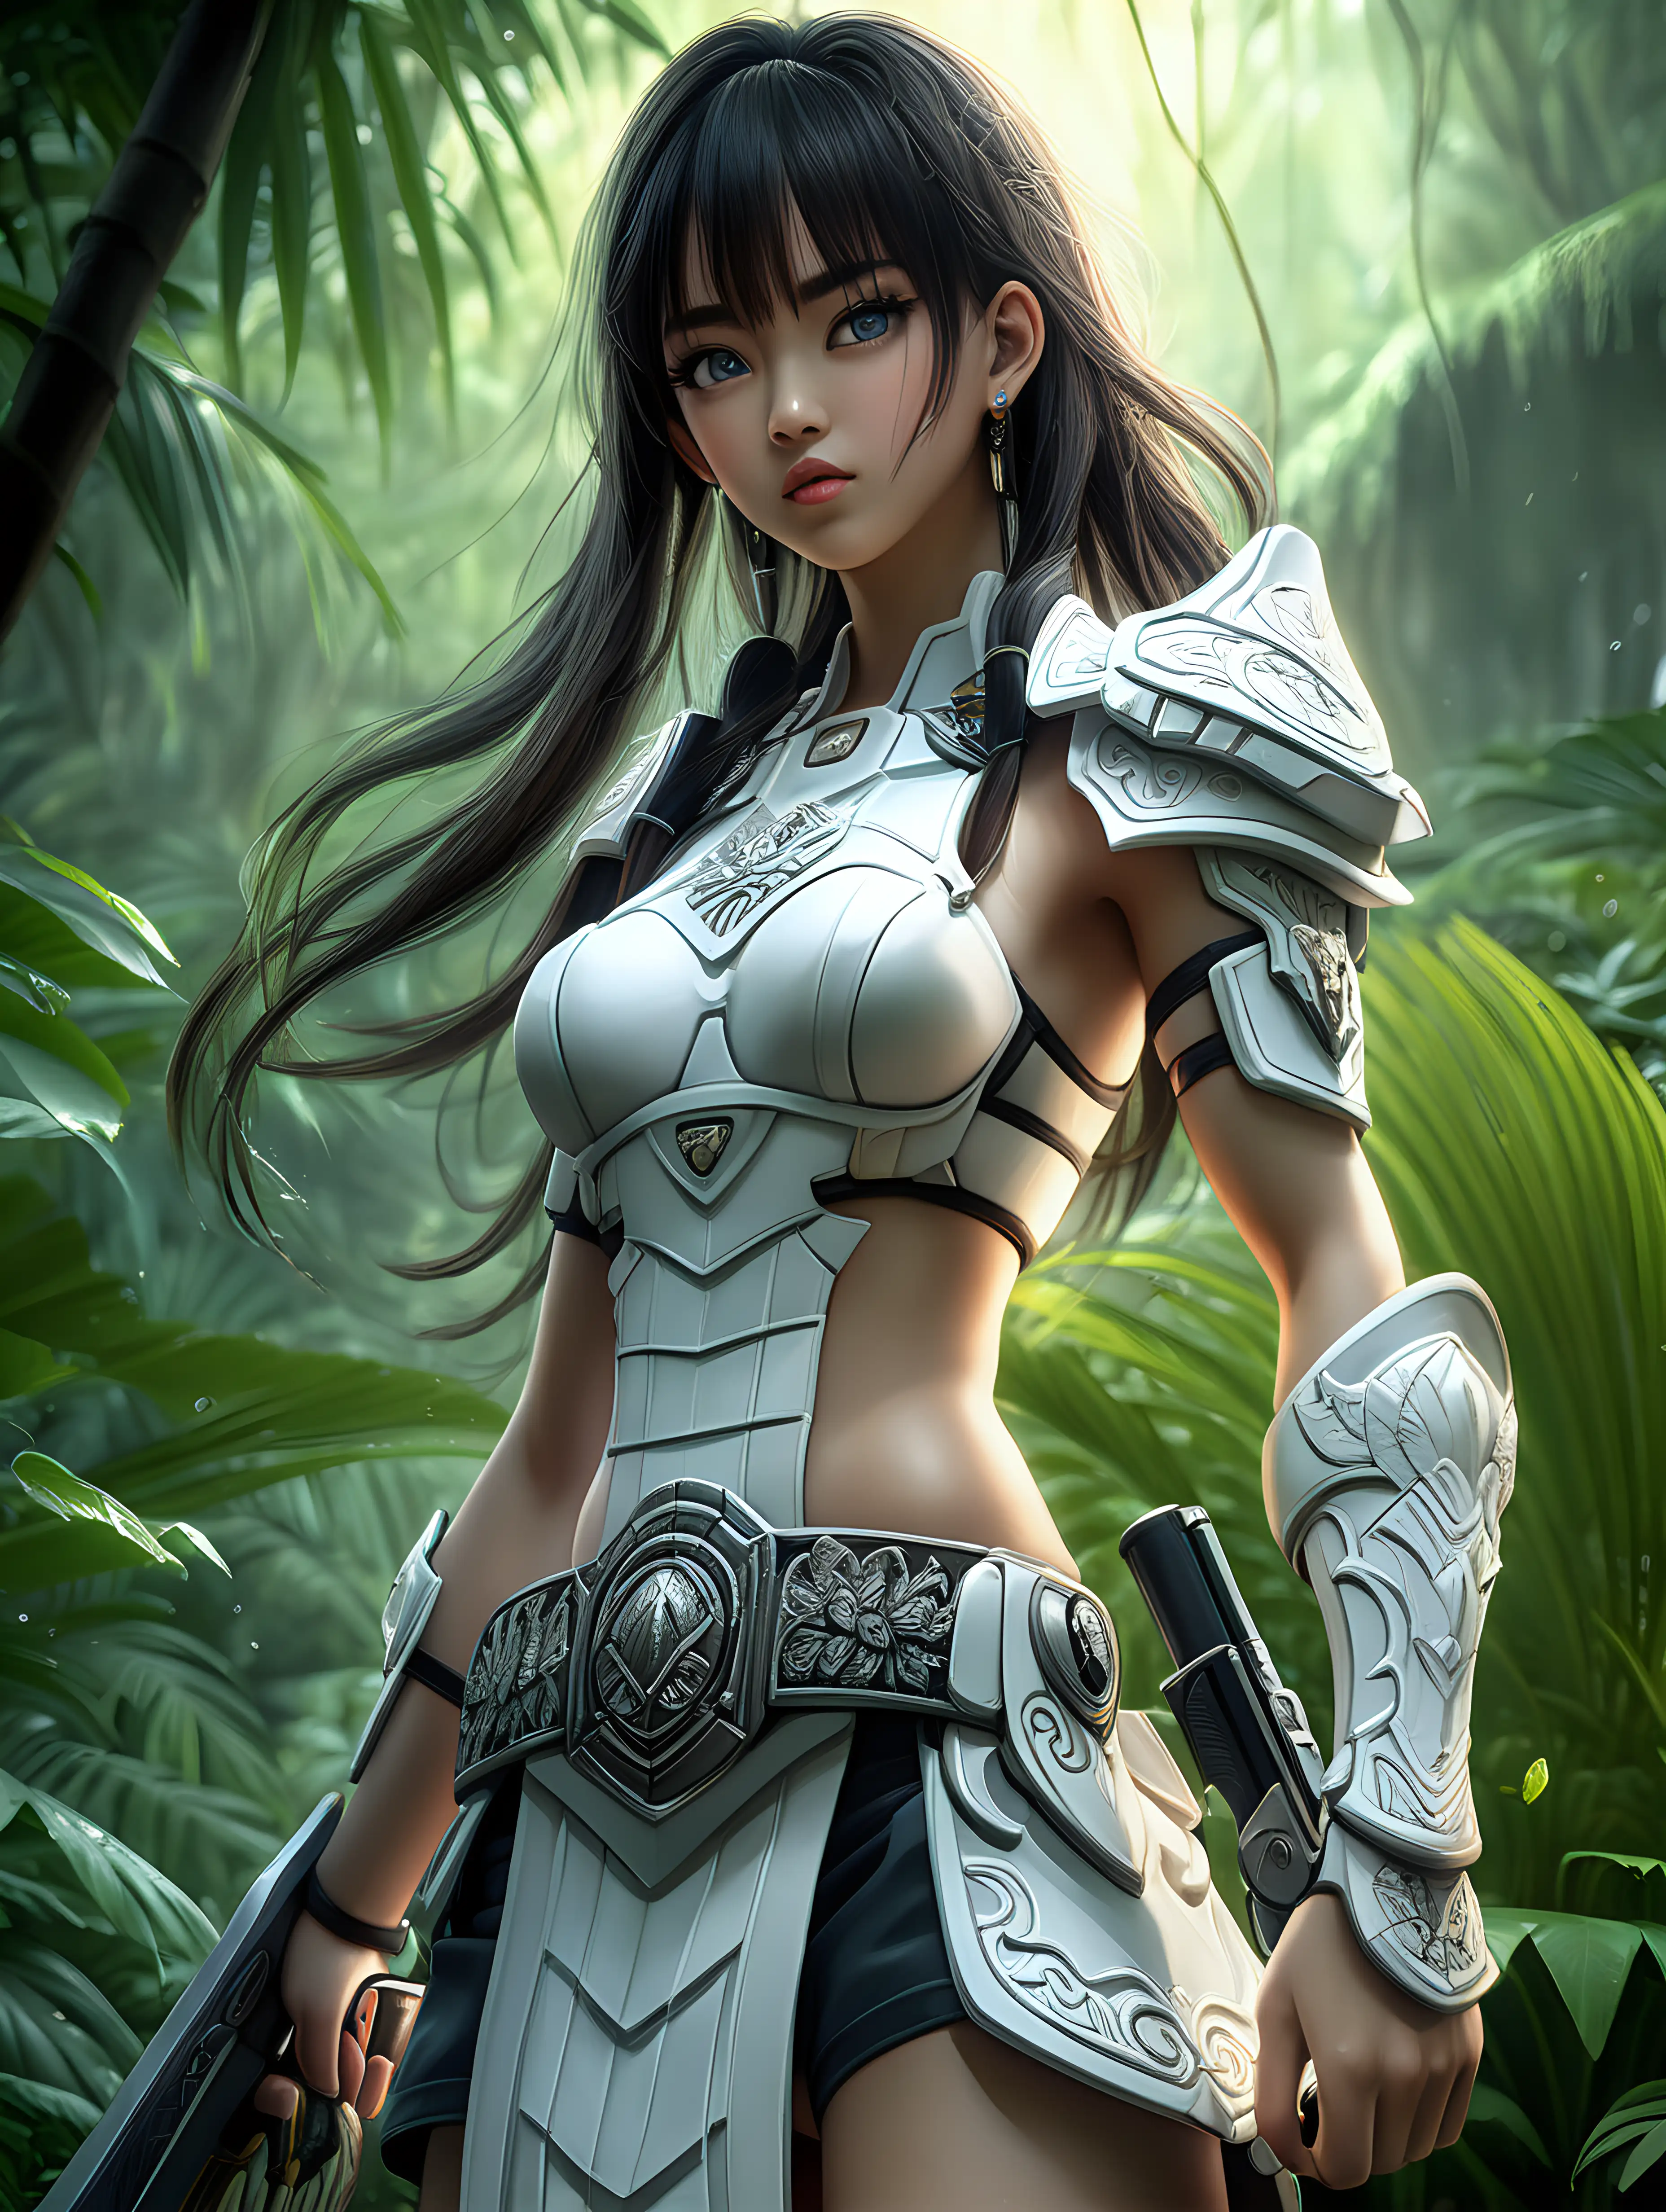 symmetry anime girl vietnamese soldier portrait, | Stable Diffusion